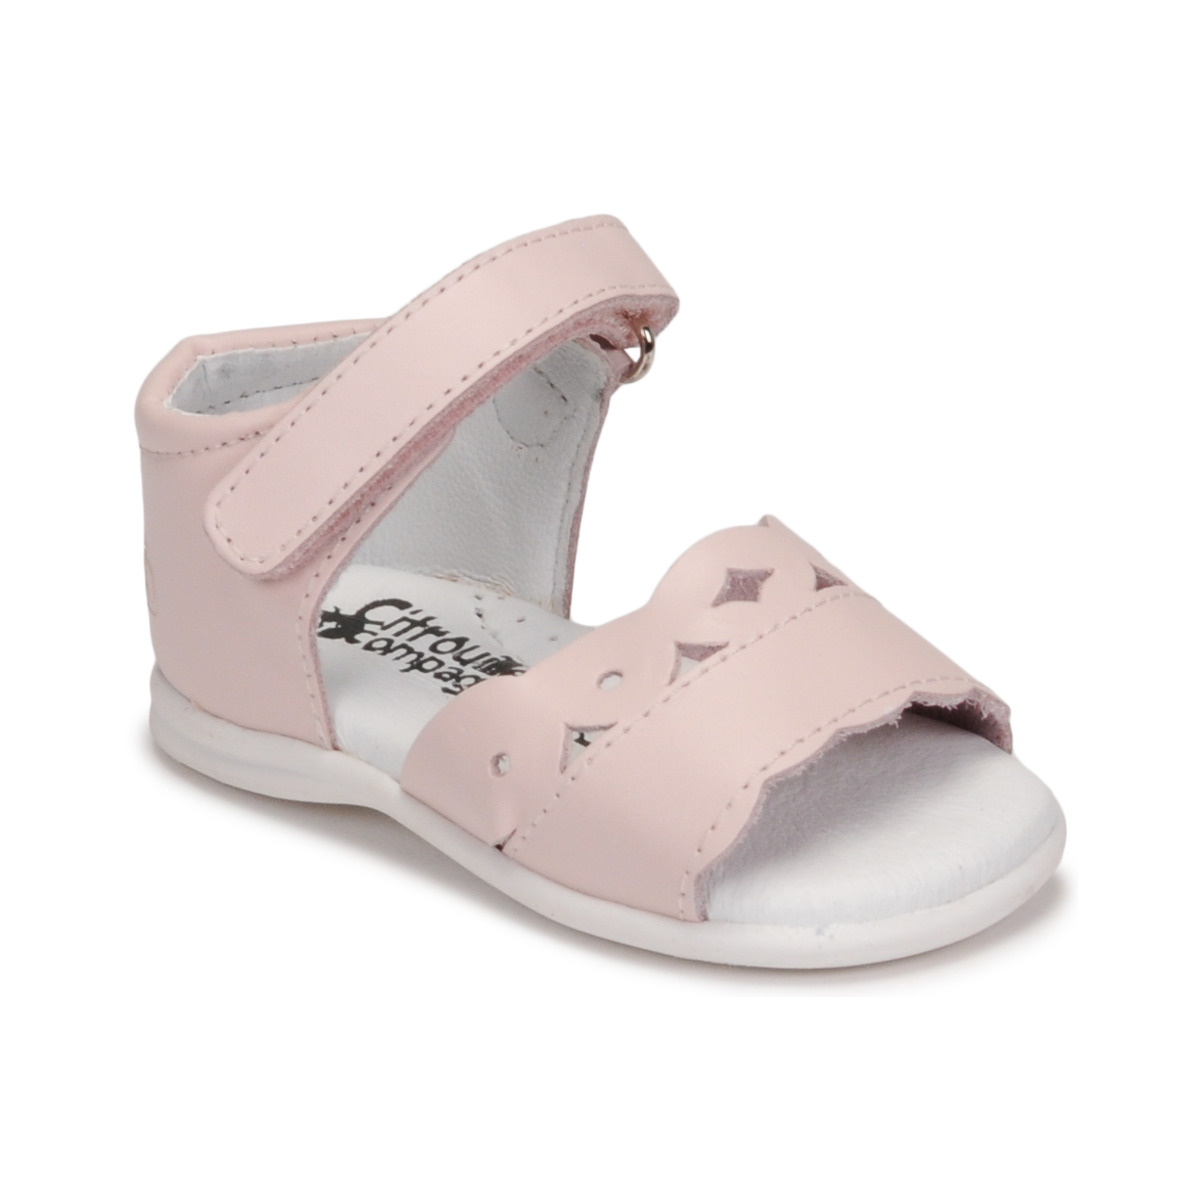 Chaussures Fille Pantoufles / Chaussons MINUS Rose